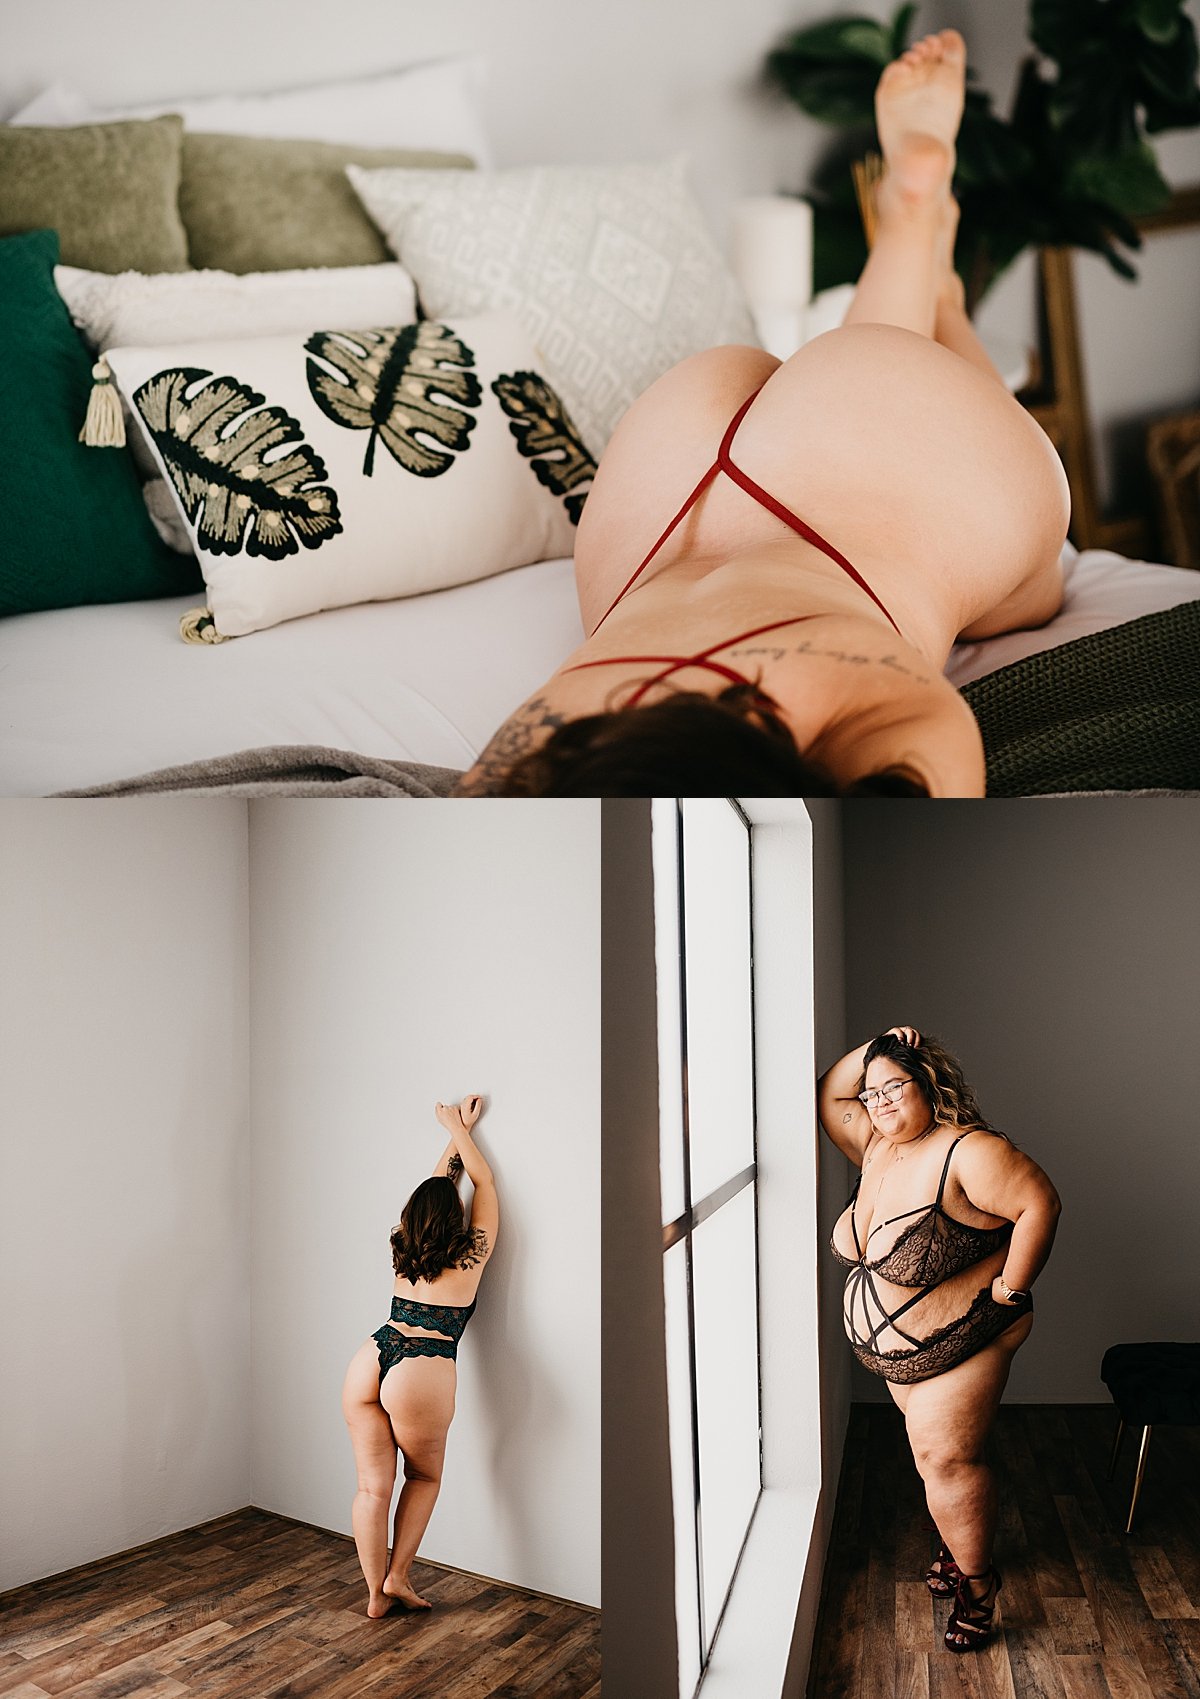  woman standing up against wall in green lingerie for boudoir stretches article  